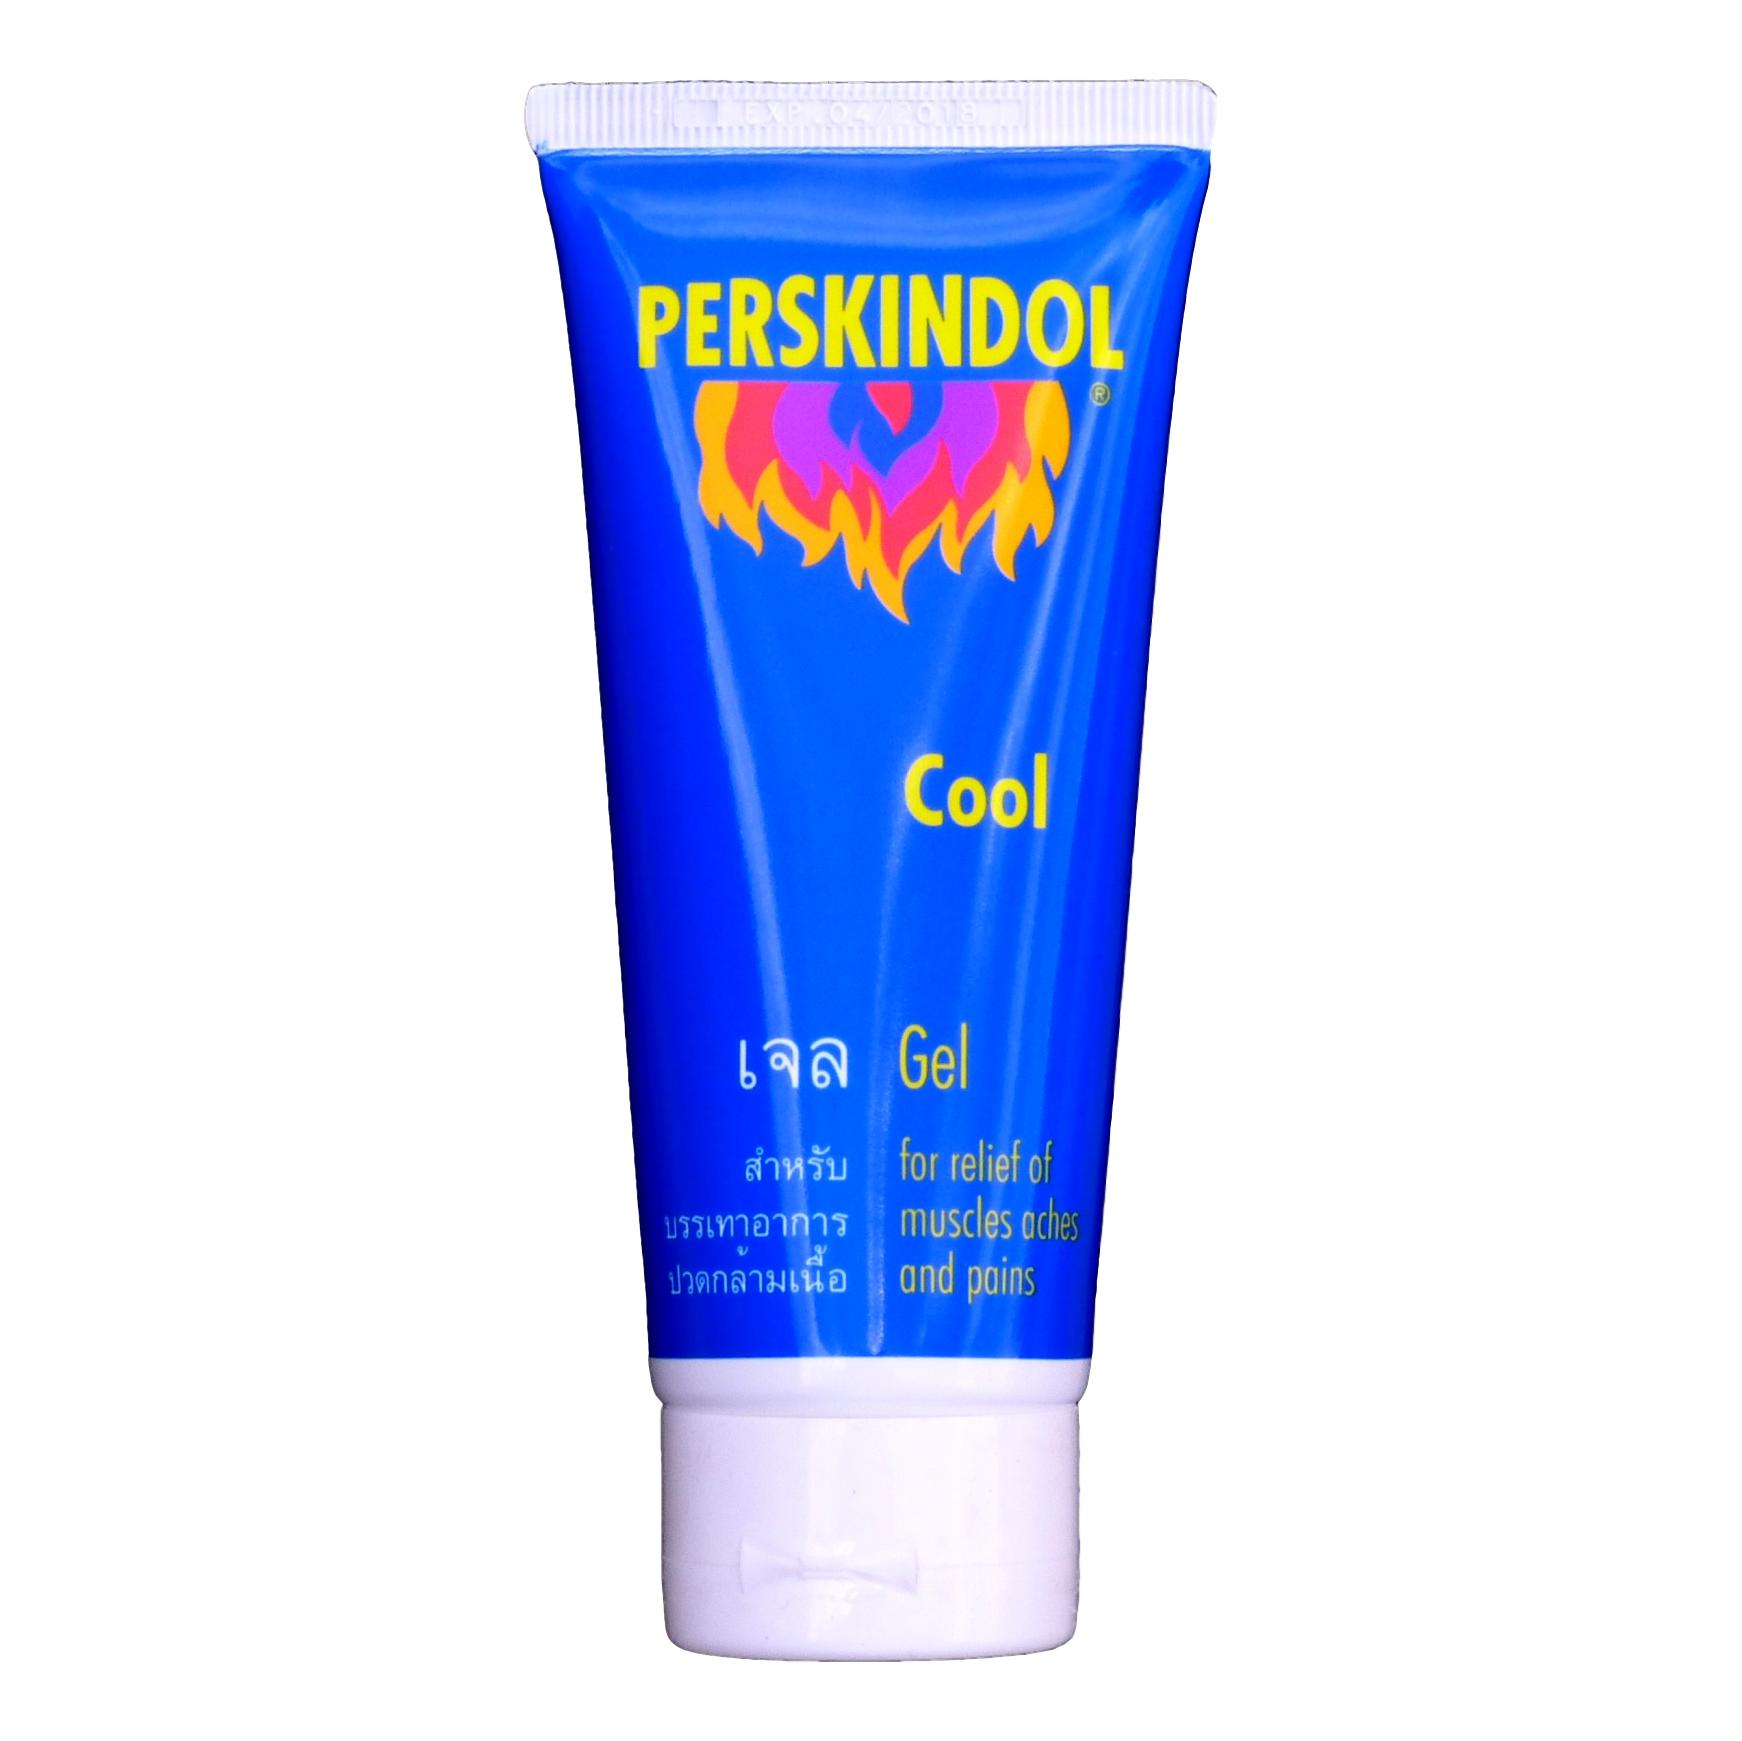 Perskindol Cool Gel for relief of muscle aches and pains 100ml 3.4oz - Asian Beauty Supply